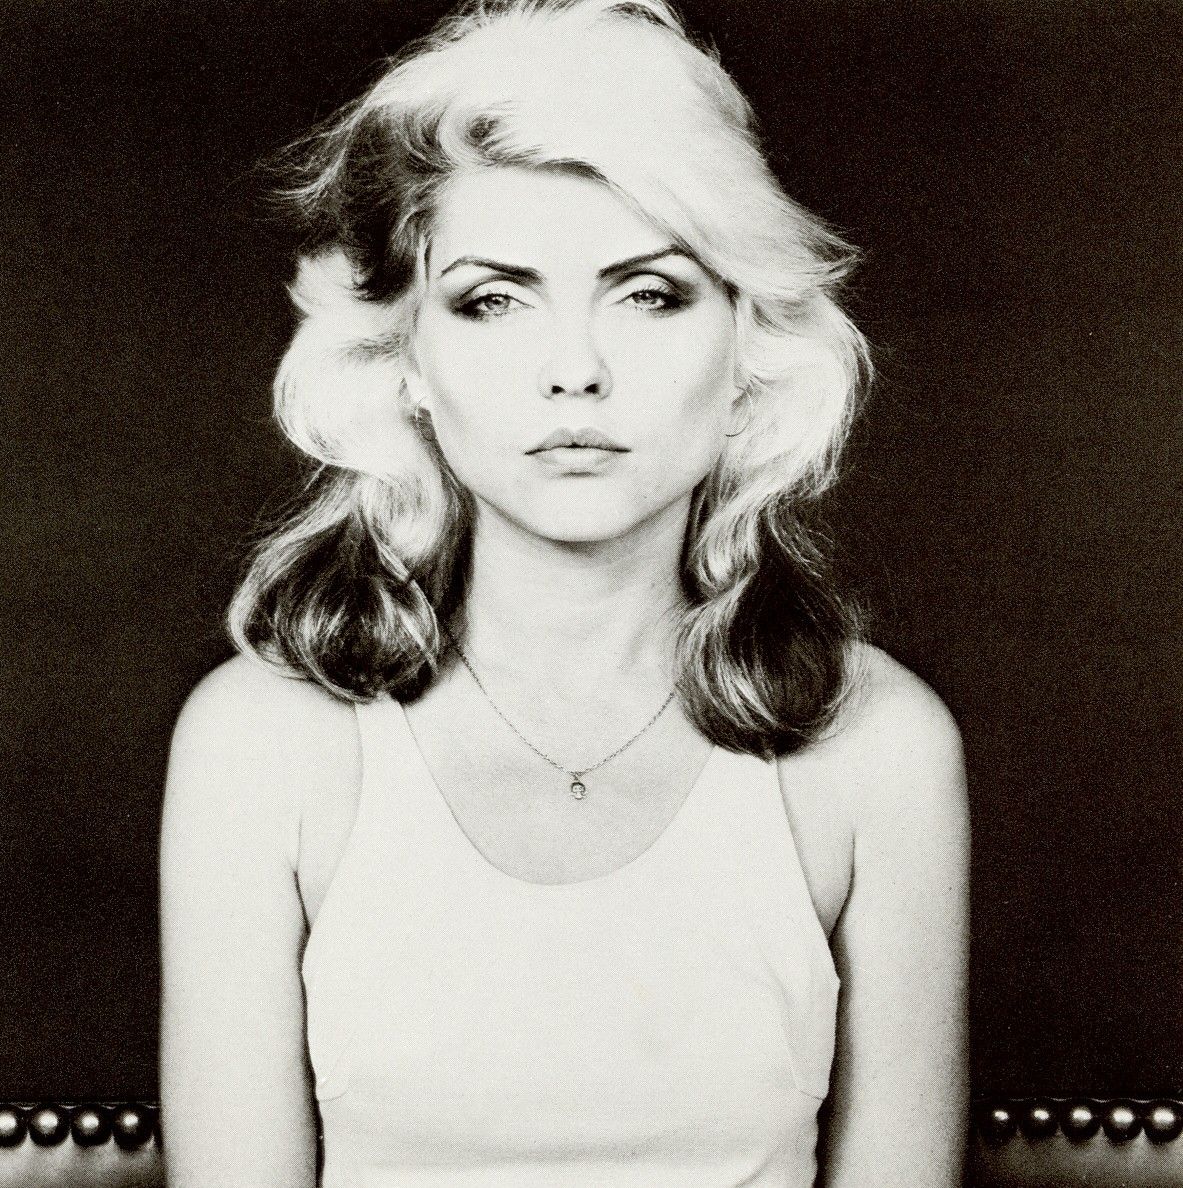 Porn Star Candye Kane Debbie Harry Alias Blondie Is An American Band Founded